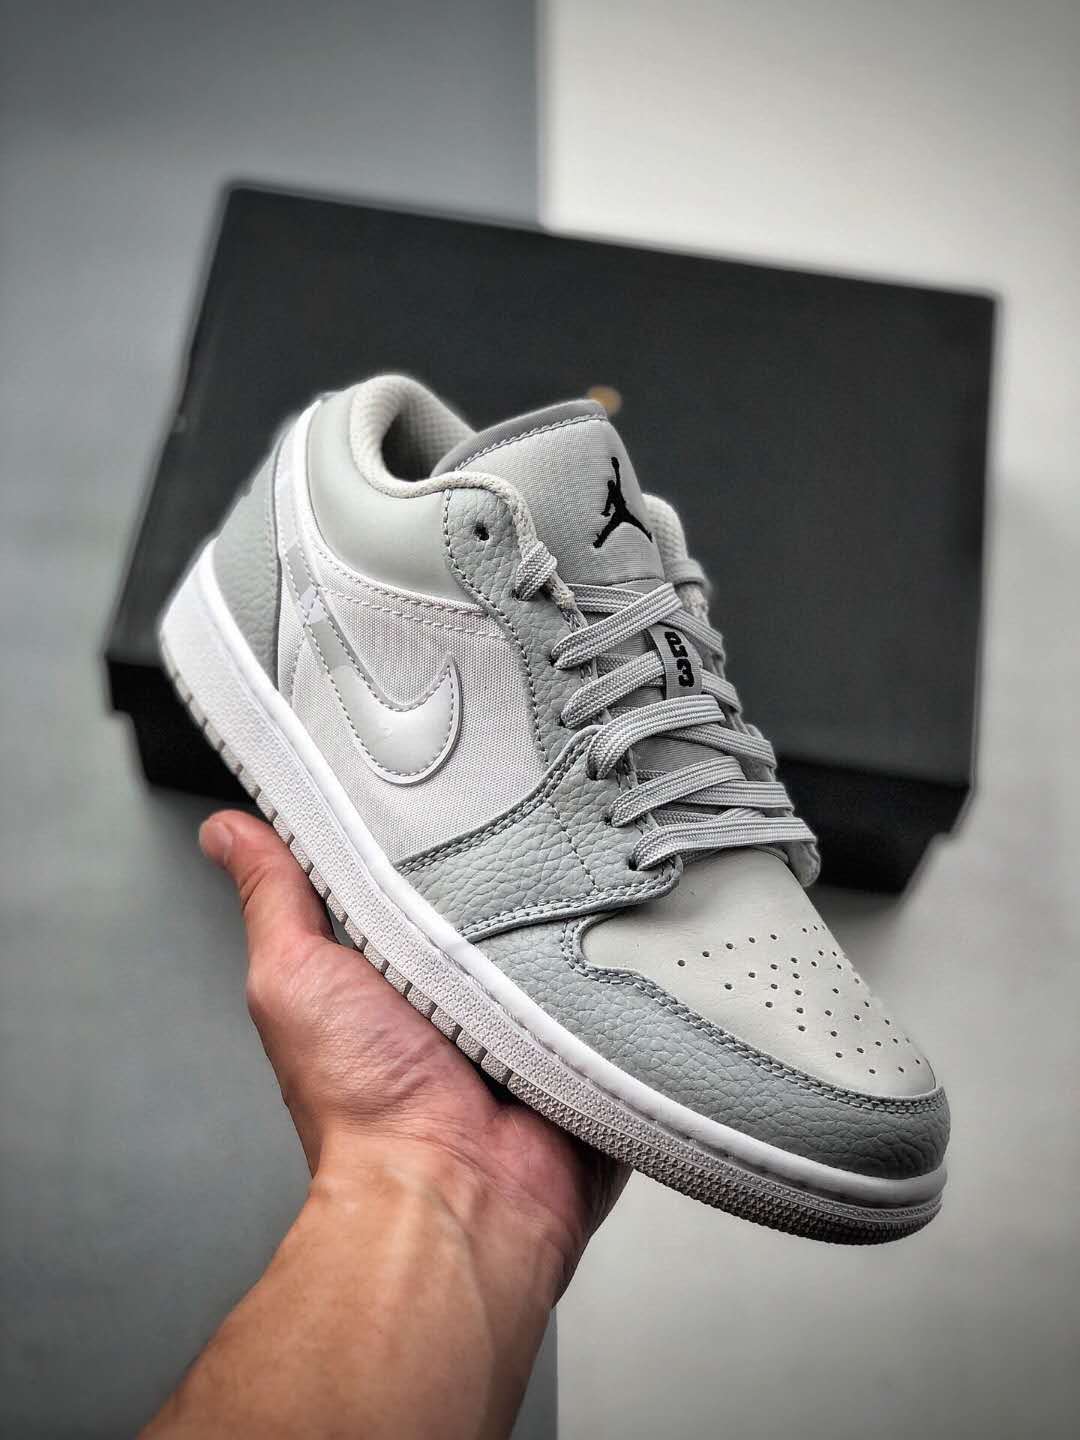 Air Jordan 1 Low 'White Camo' DC9036-100 - Sleek and Stylish Footwear for All Sneaker Enthusiasts